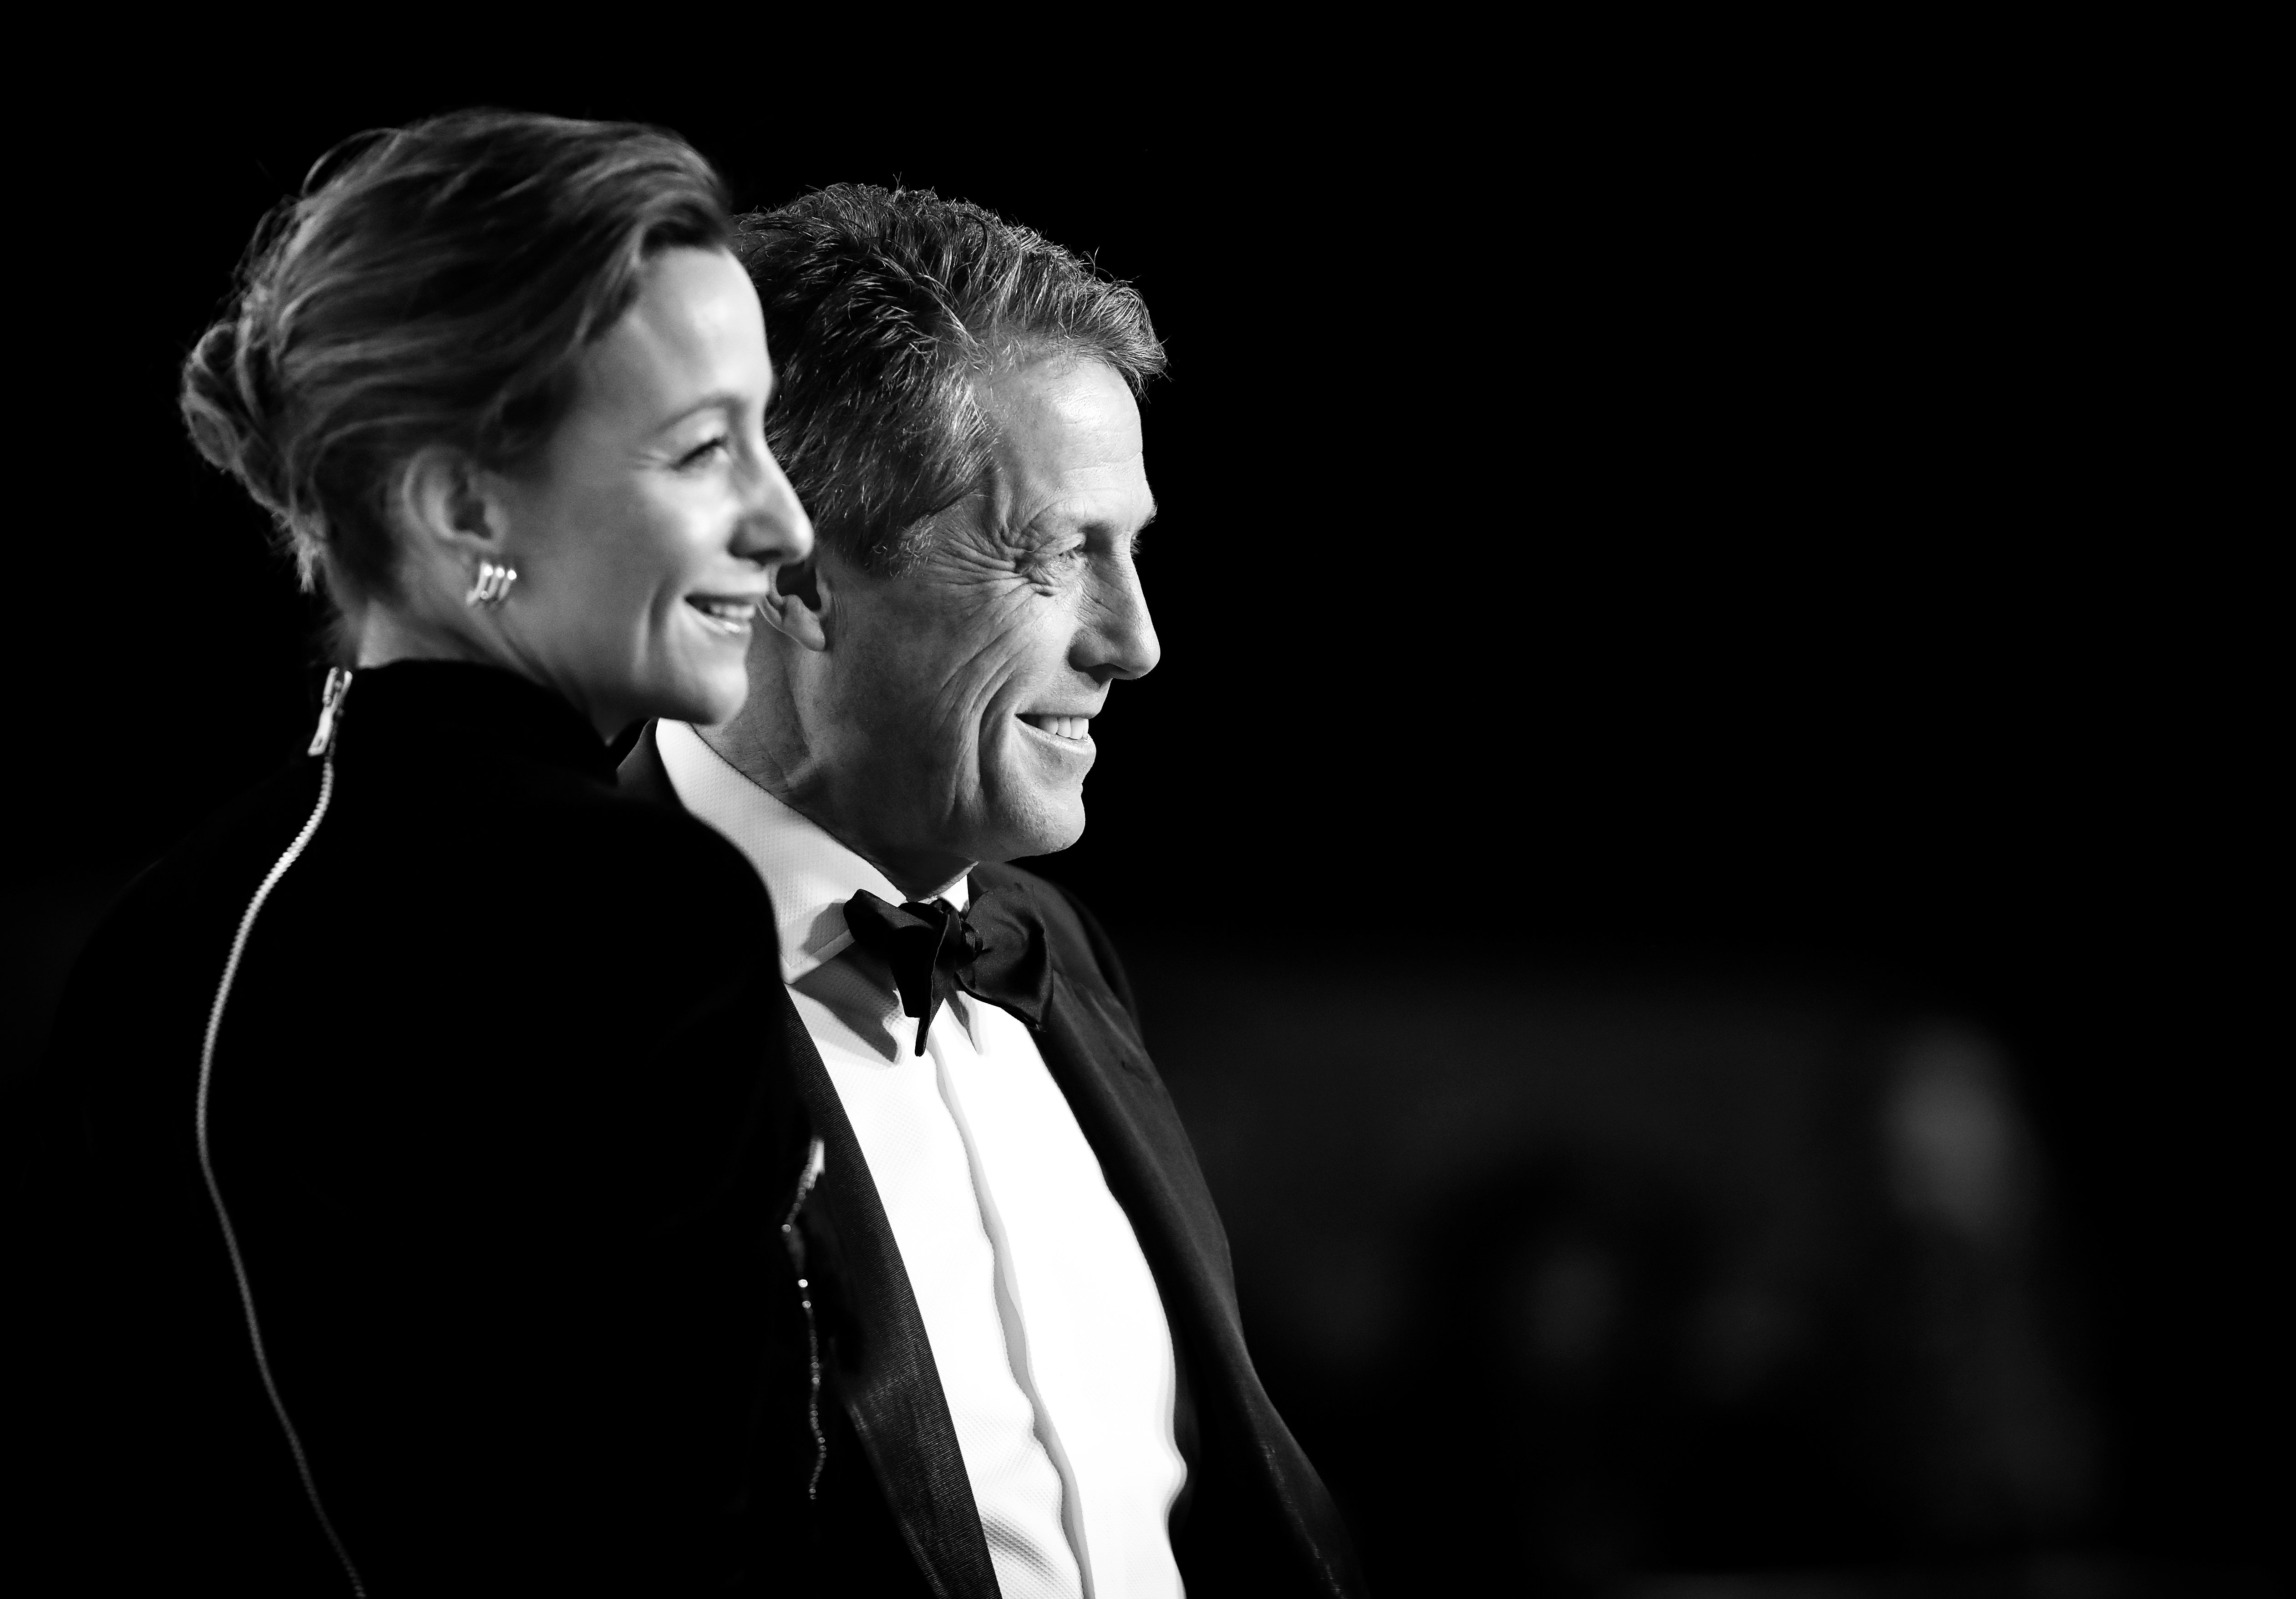 Anna Elisabet Eberstein and Hugh Grant attend the EE British Academy Film Awards 2020 at the Royal Albert Hall on February 2, 2020 in London, England. | Source: Getty Images 